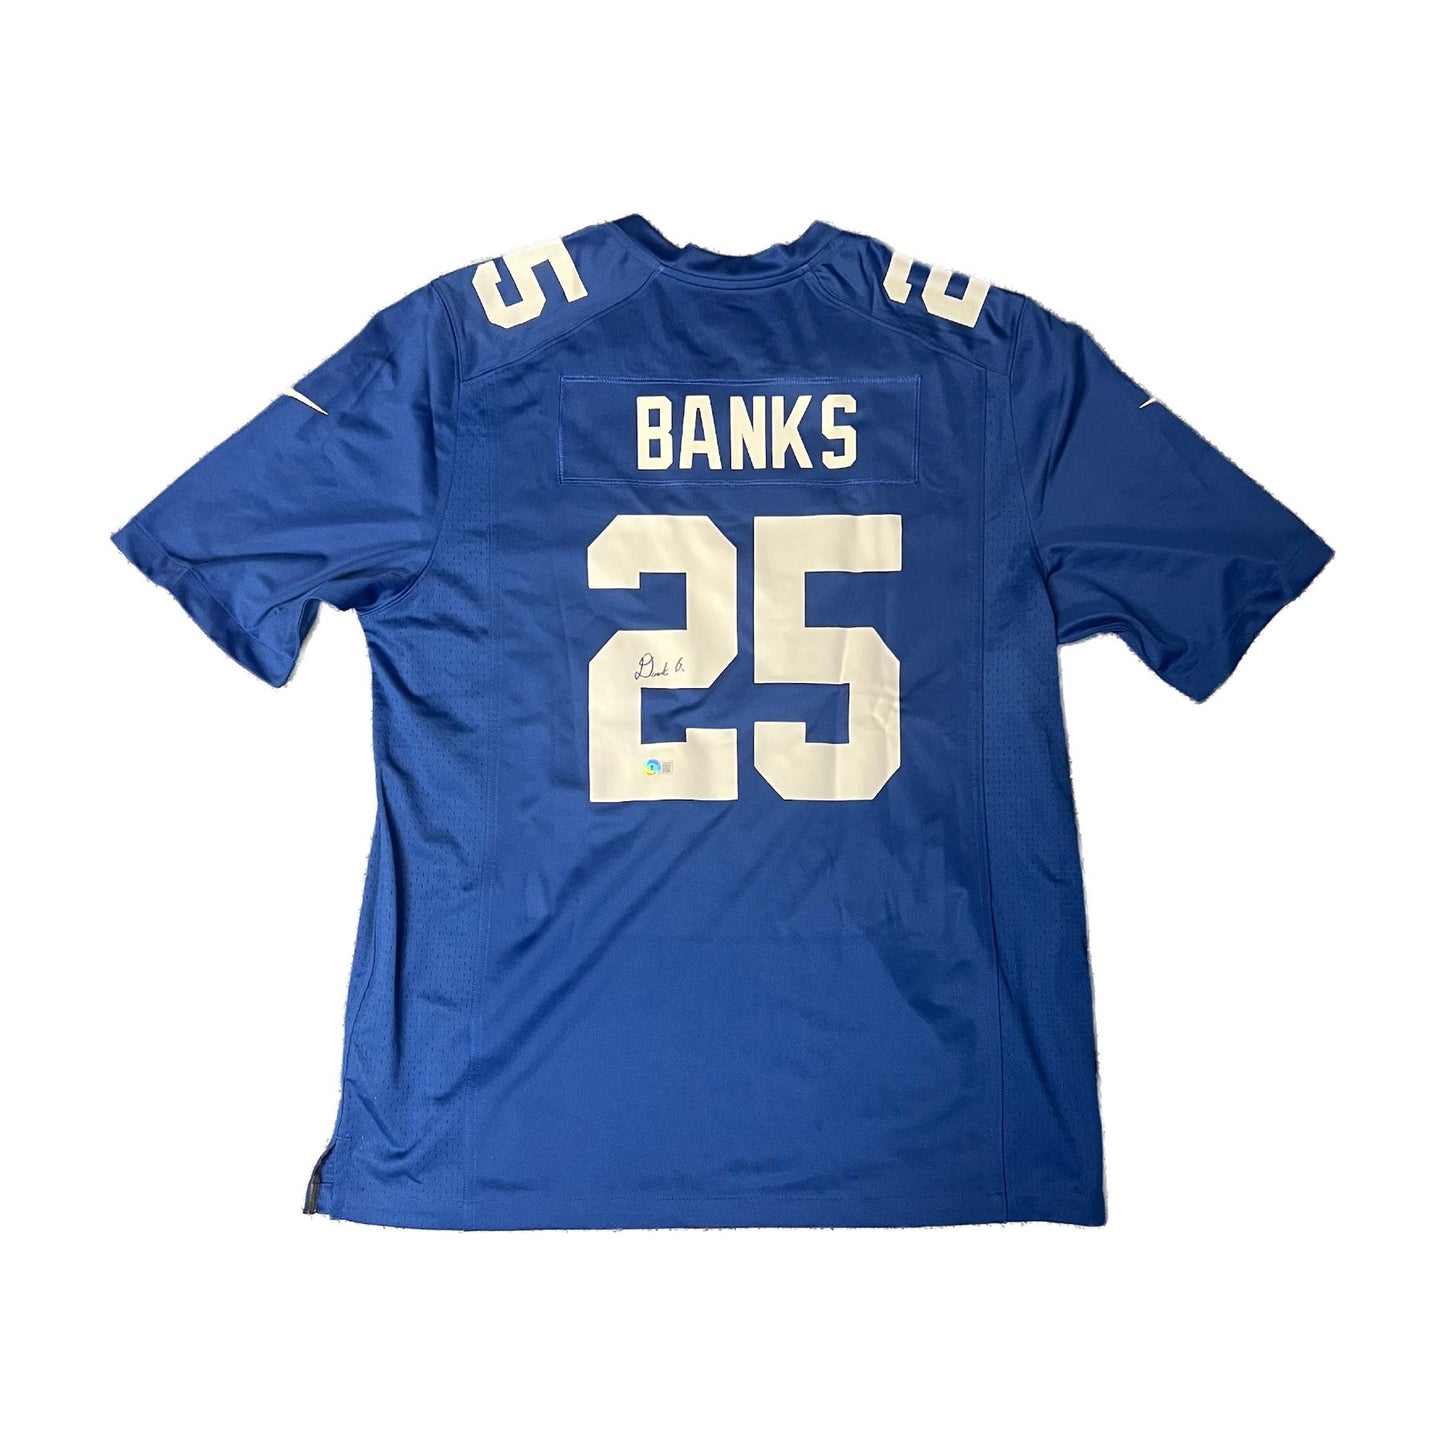 Deonte Banks Autographed Nike Blue Auth Jersey - Beckett Auth